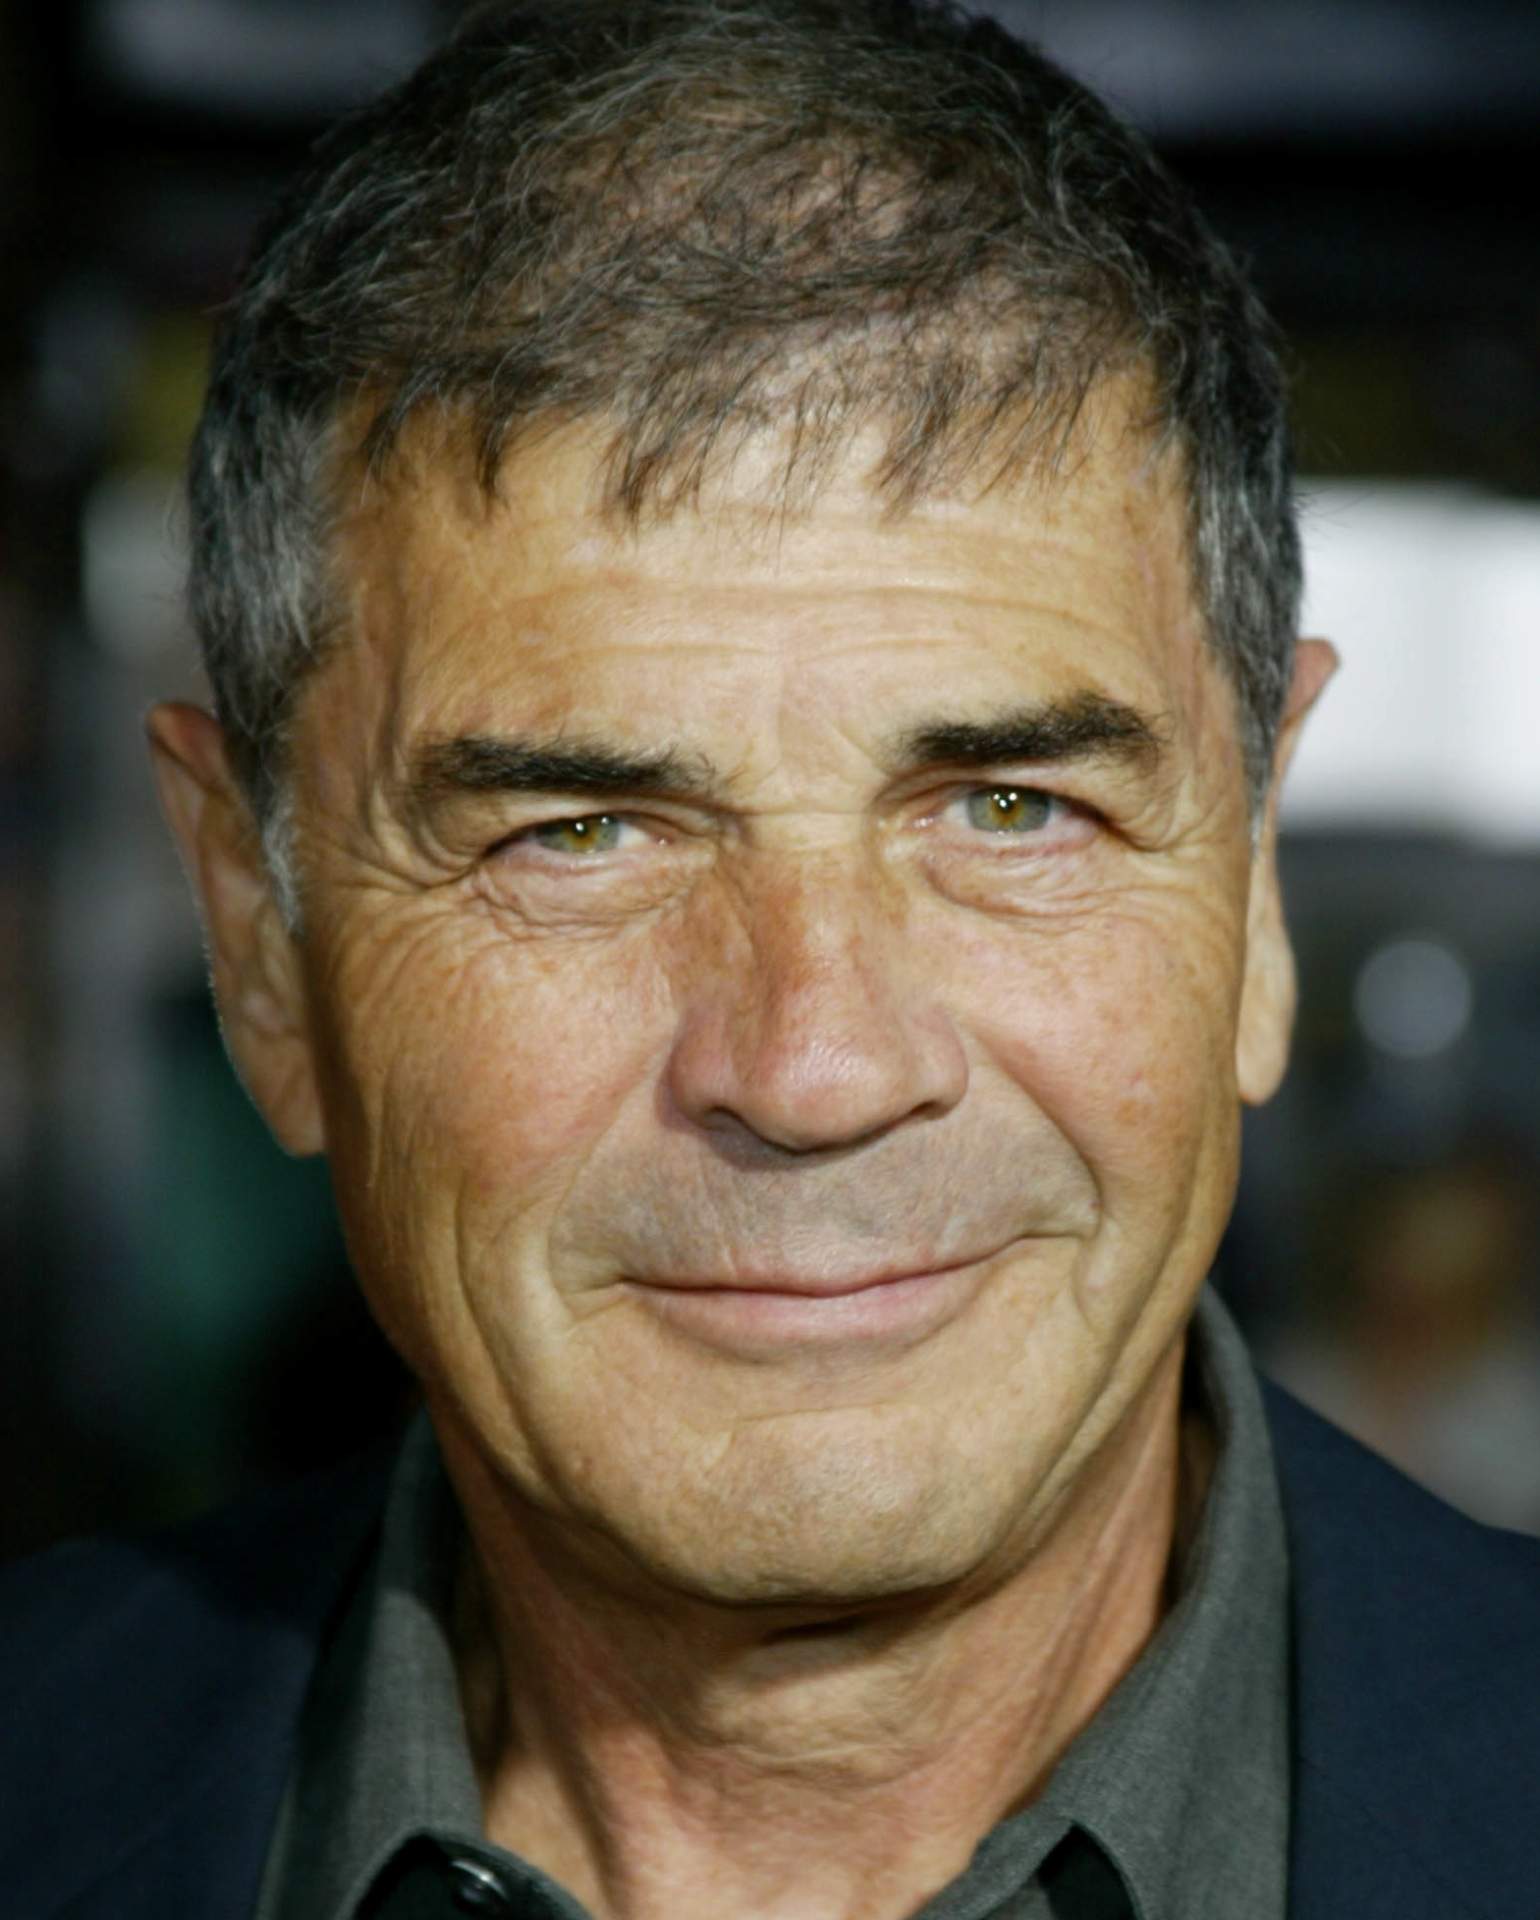 Academy Award Nominee Robert Forster to be artist-in-residence at the Burchfield Penney